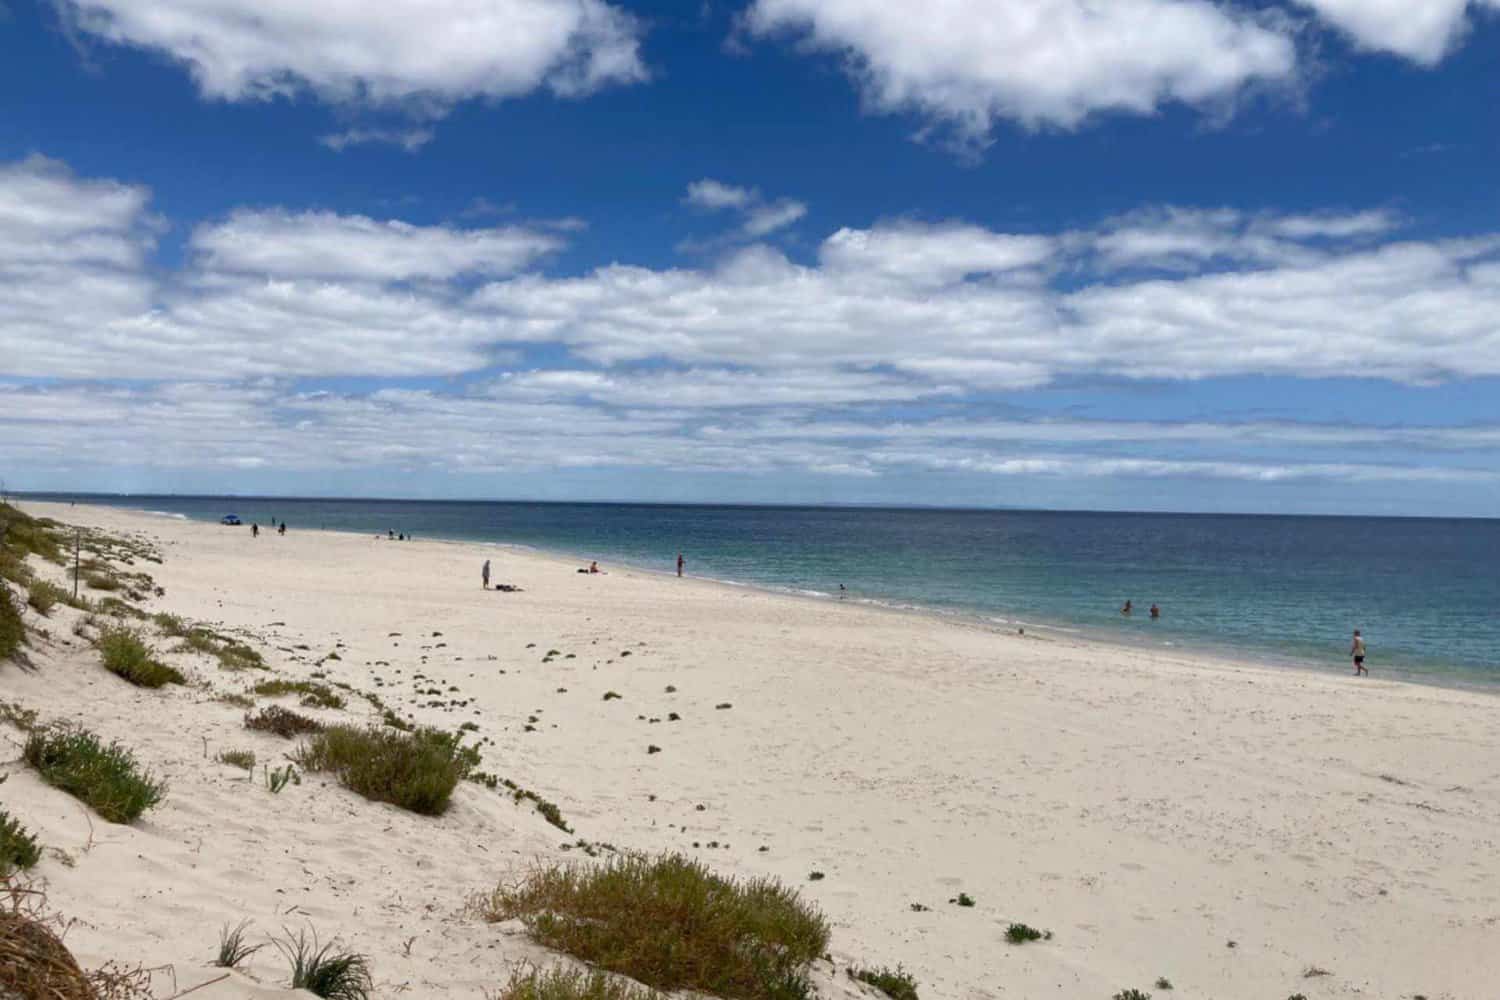 View of people enjoying Peppermint Grove Beach which is one of the most easily accessible dog friendly beaches Margaret River